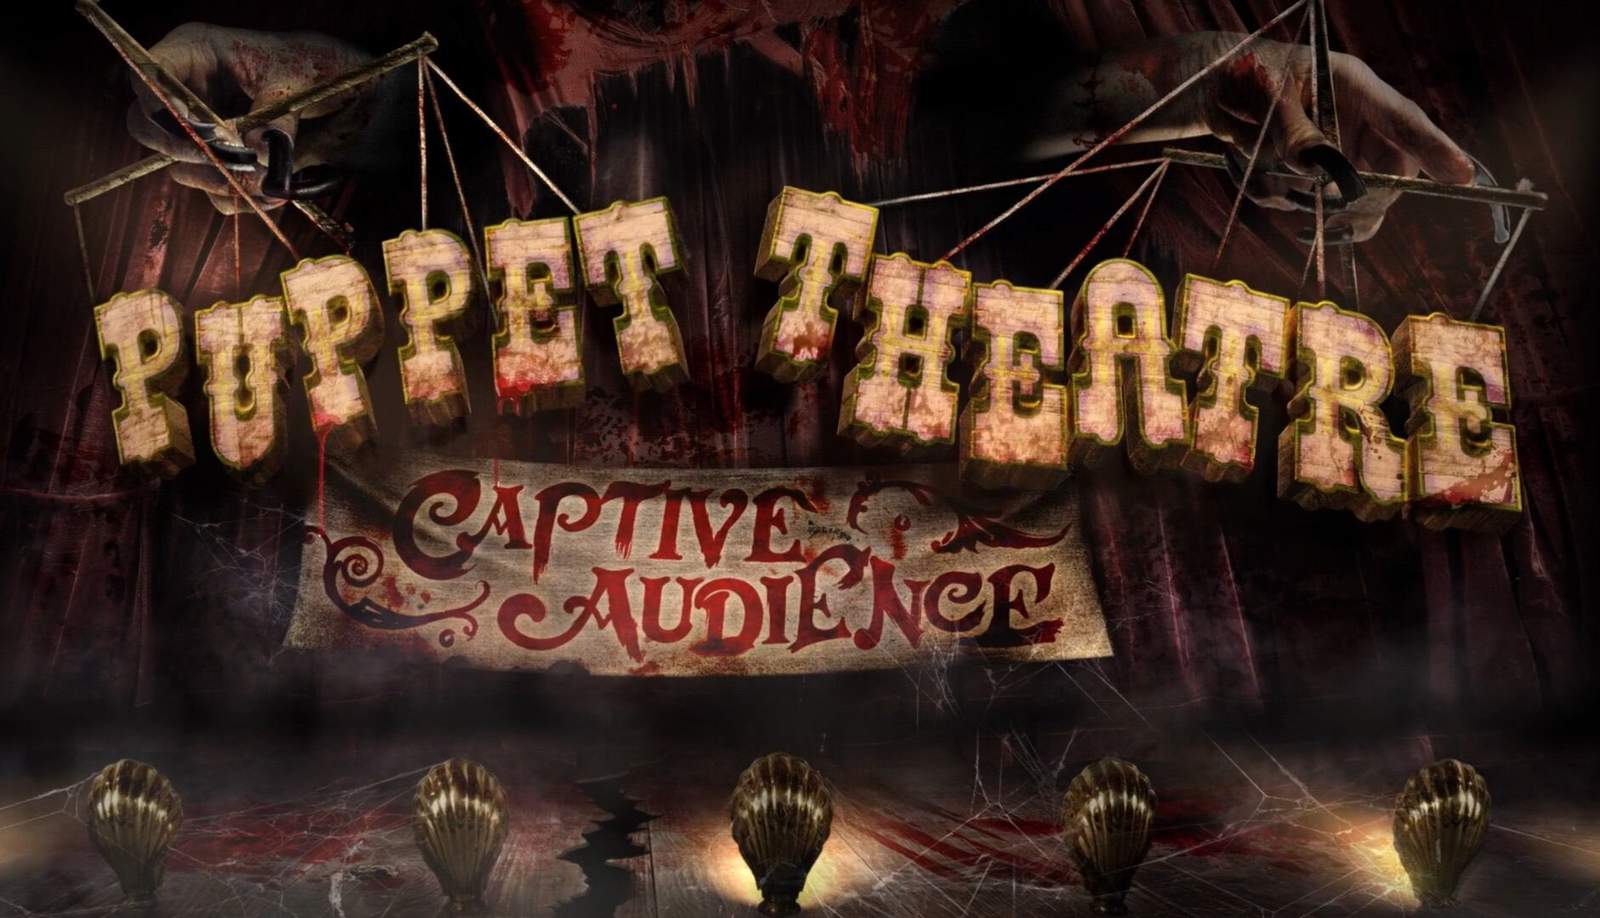 ’Puppet Theater: Captive Audience’ house coming to Universal Orlando’s Halloween Horror Nights